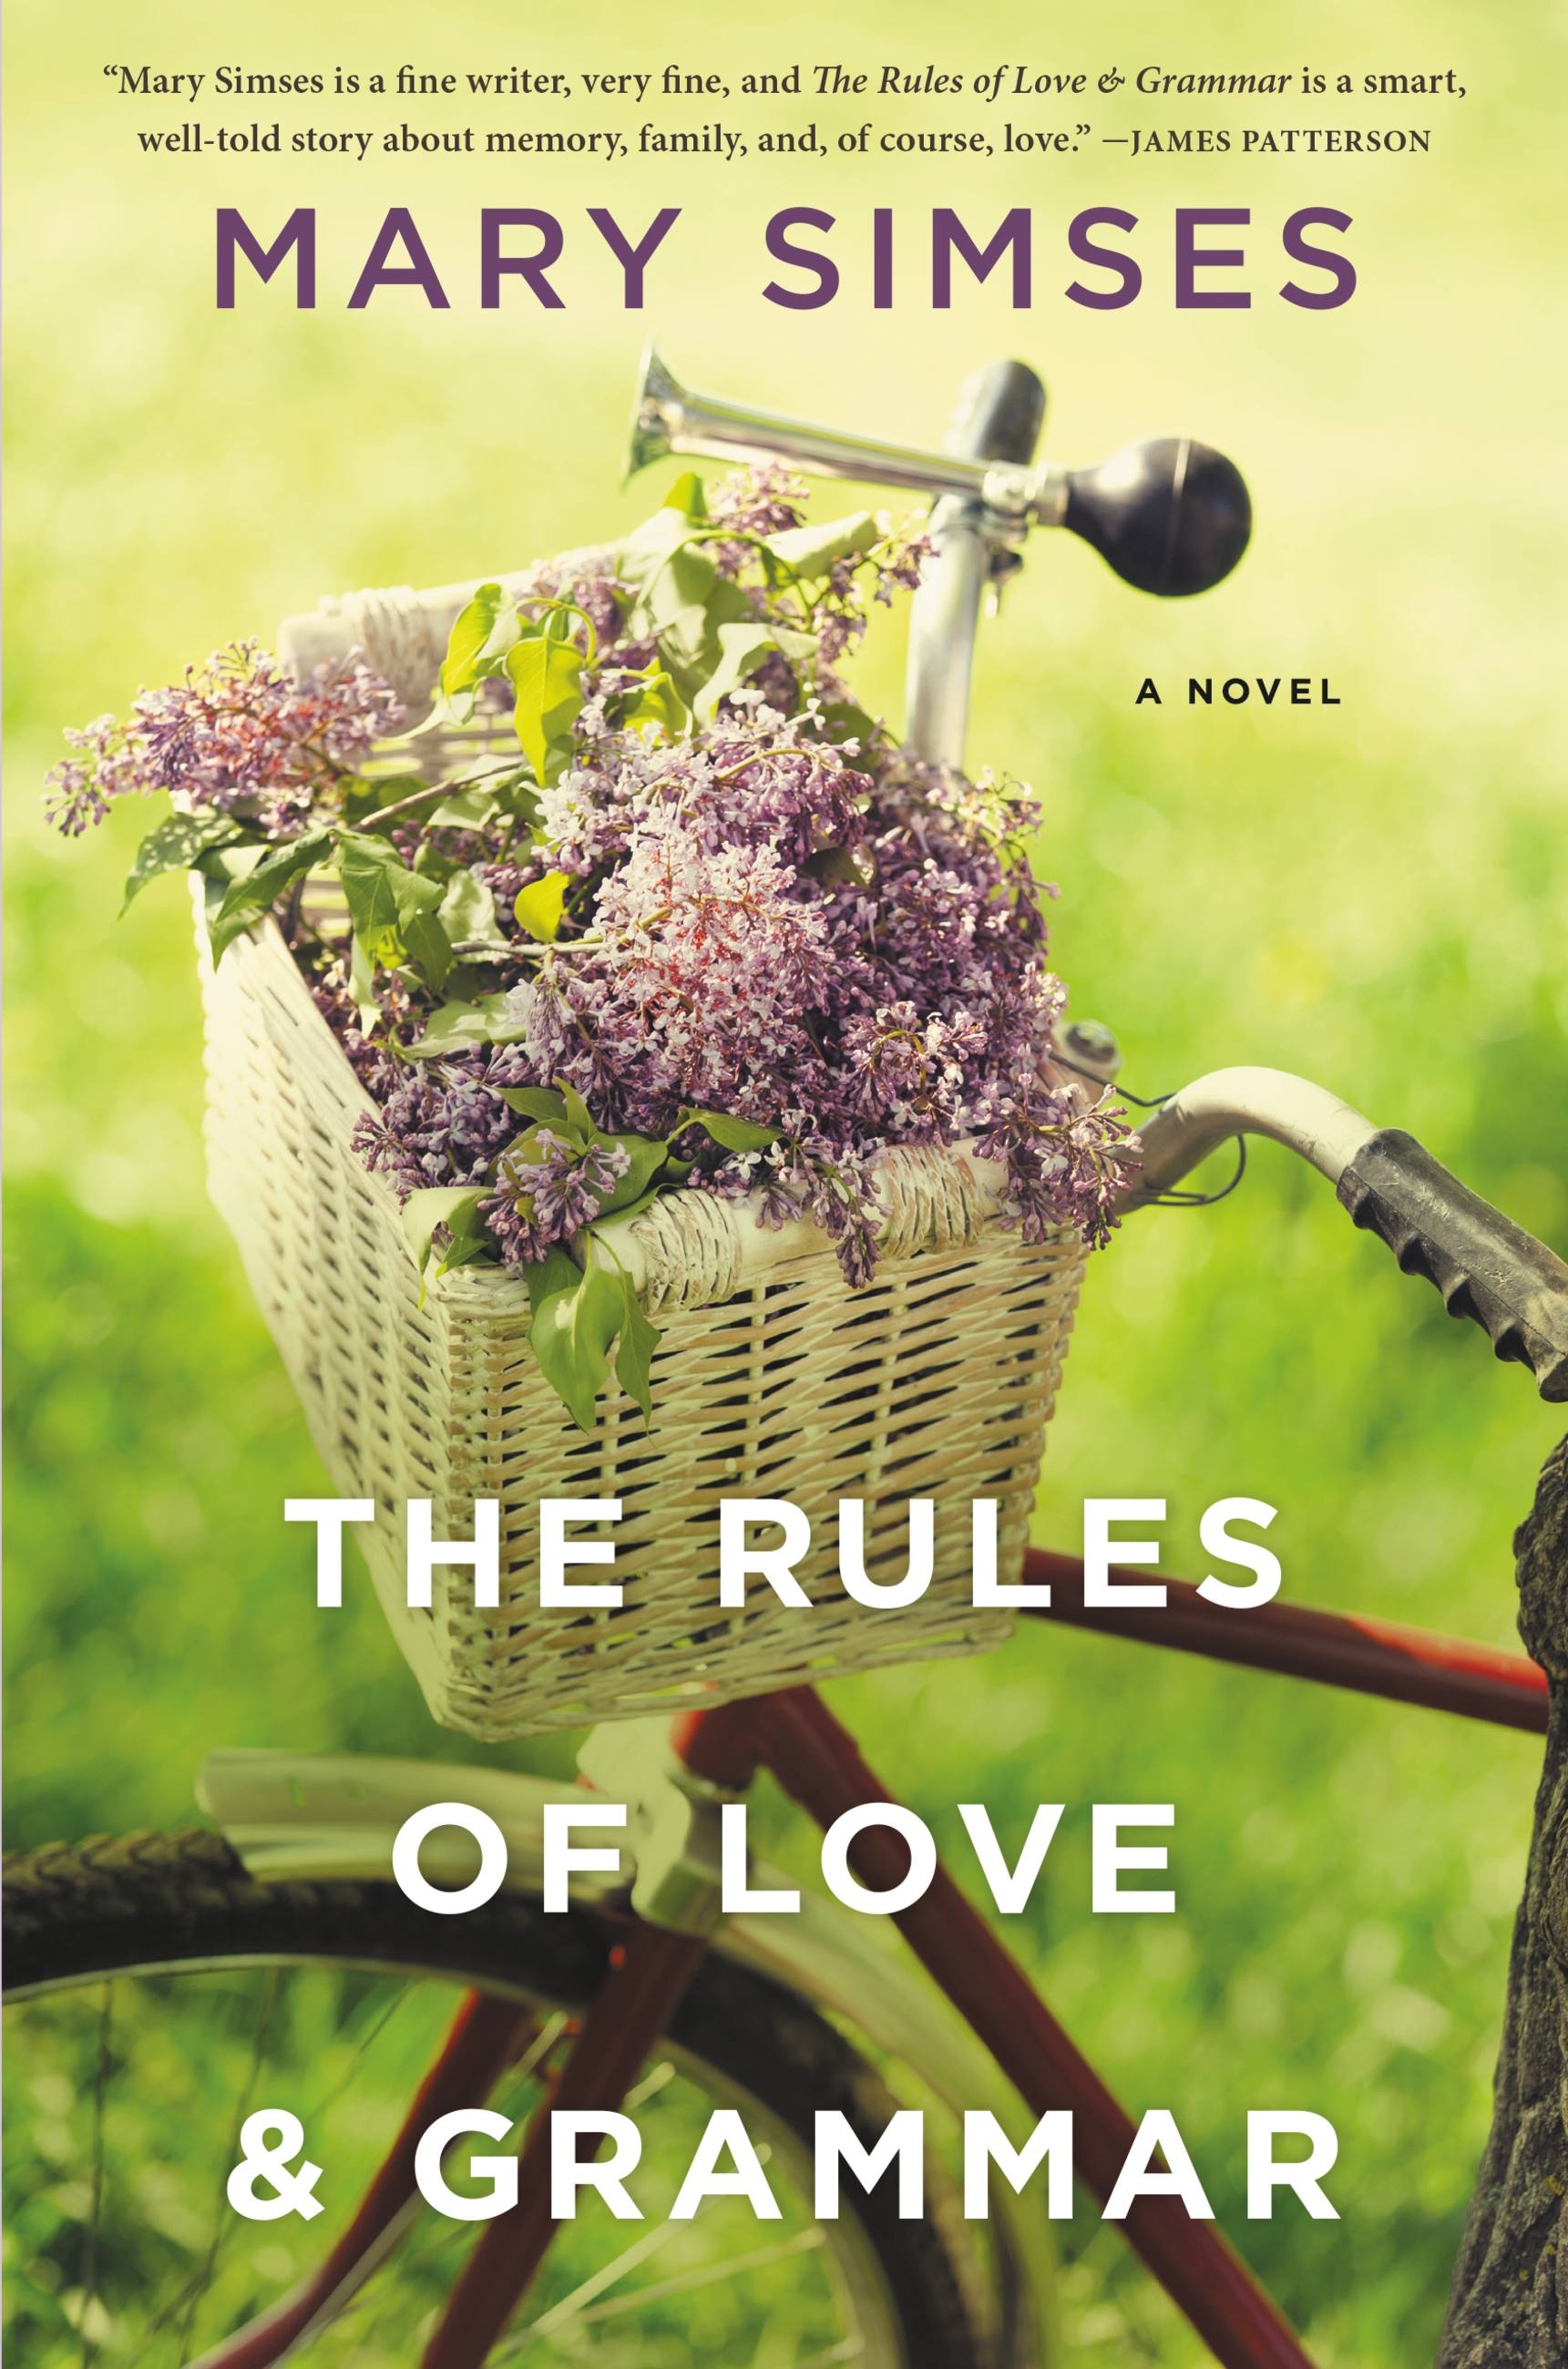 The Rules of Love and Grammar | Summer Reading 2017 Book Reviews | Nicole Victory Design